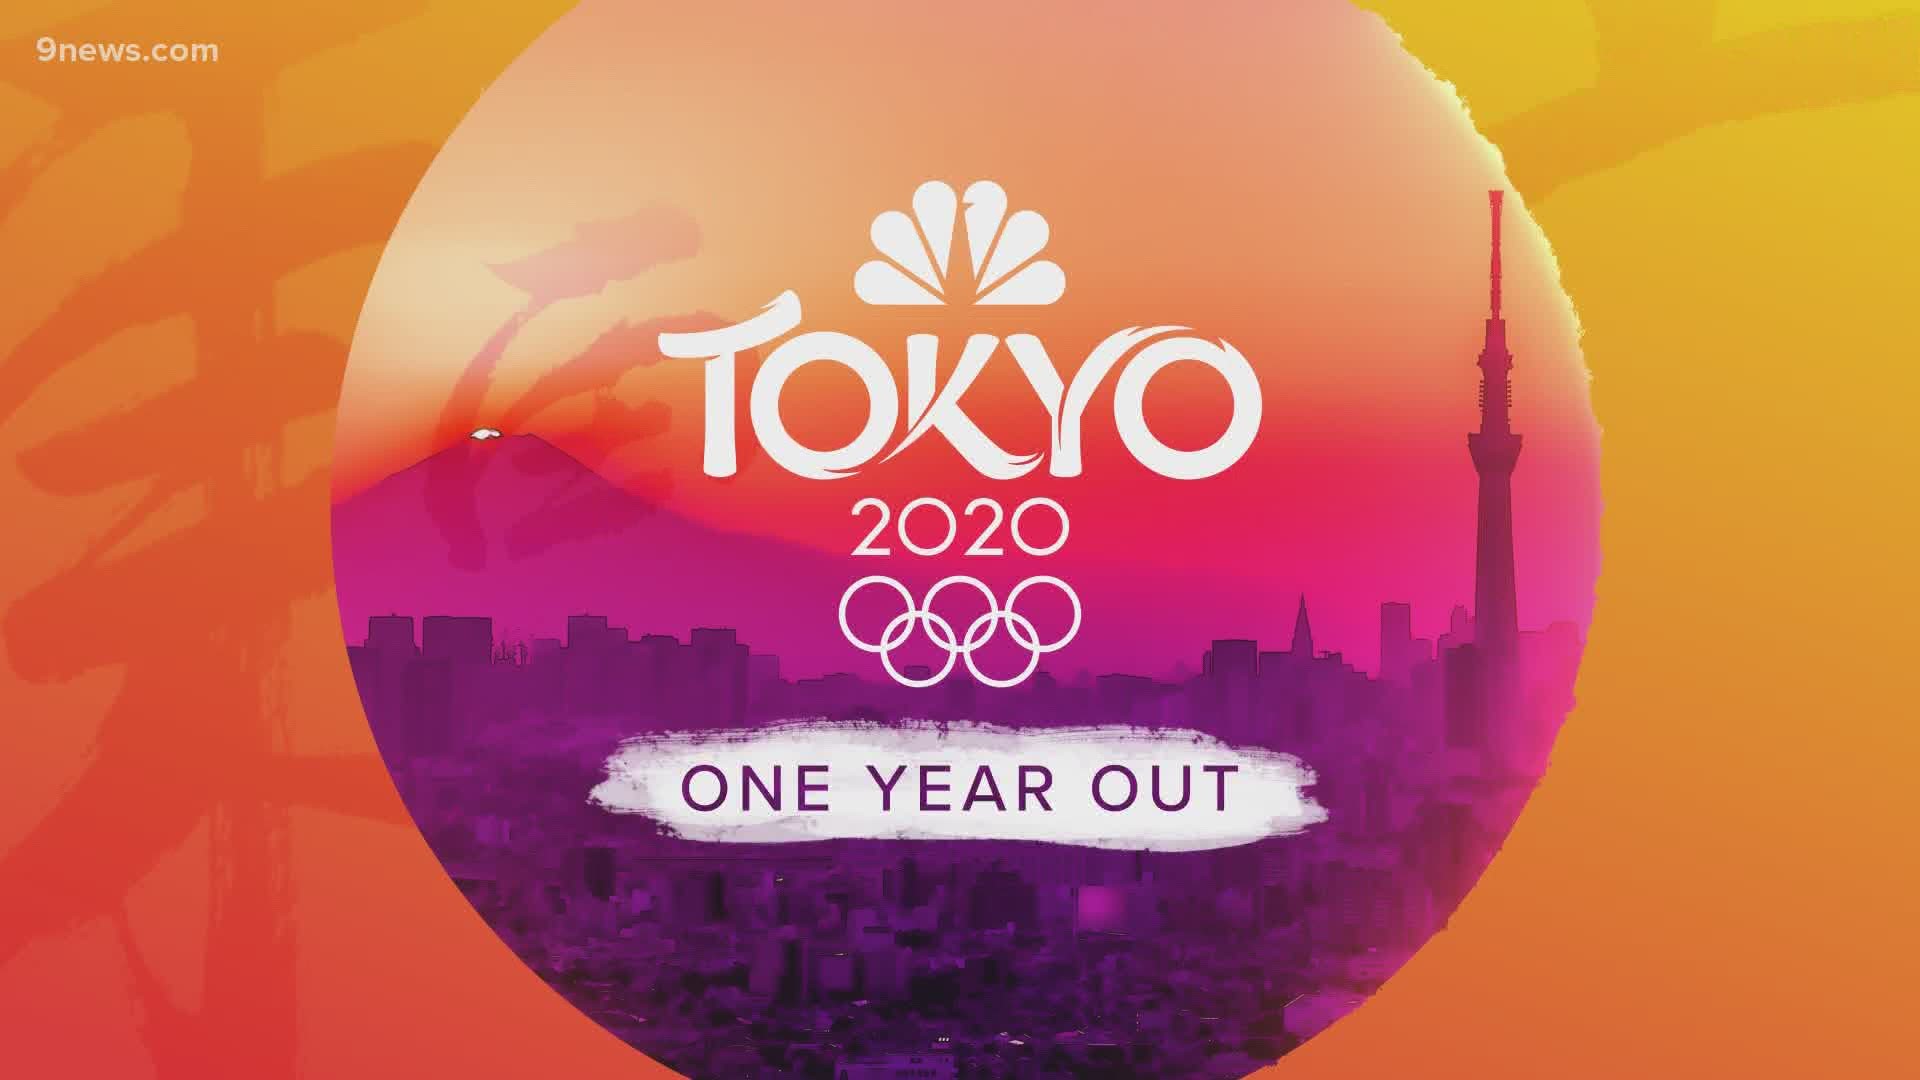 The 2020 Games are set to go on July 23, 2021, but organizers are clear: a second postponement will mean cancellation.